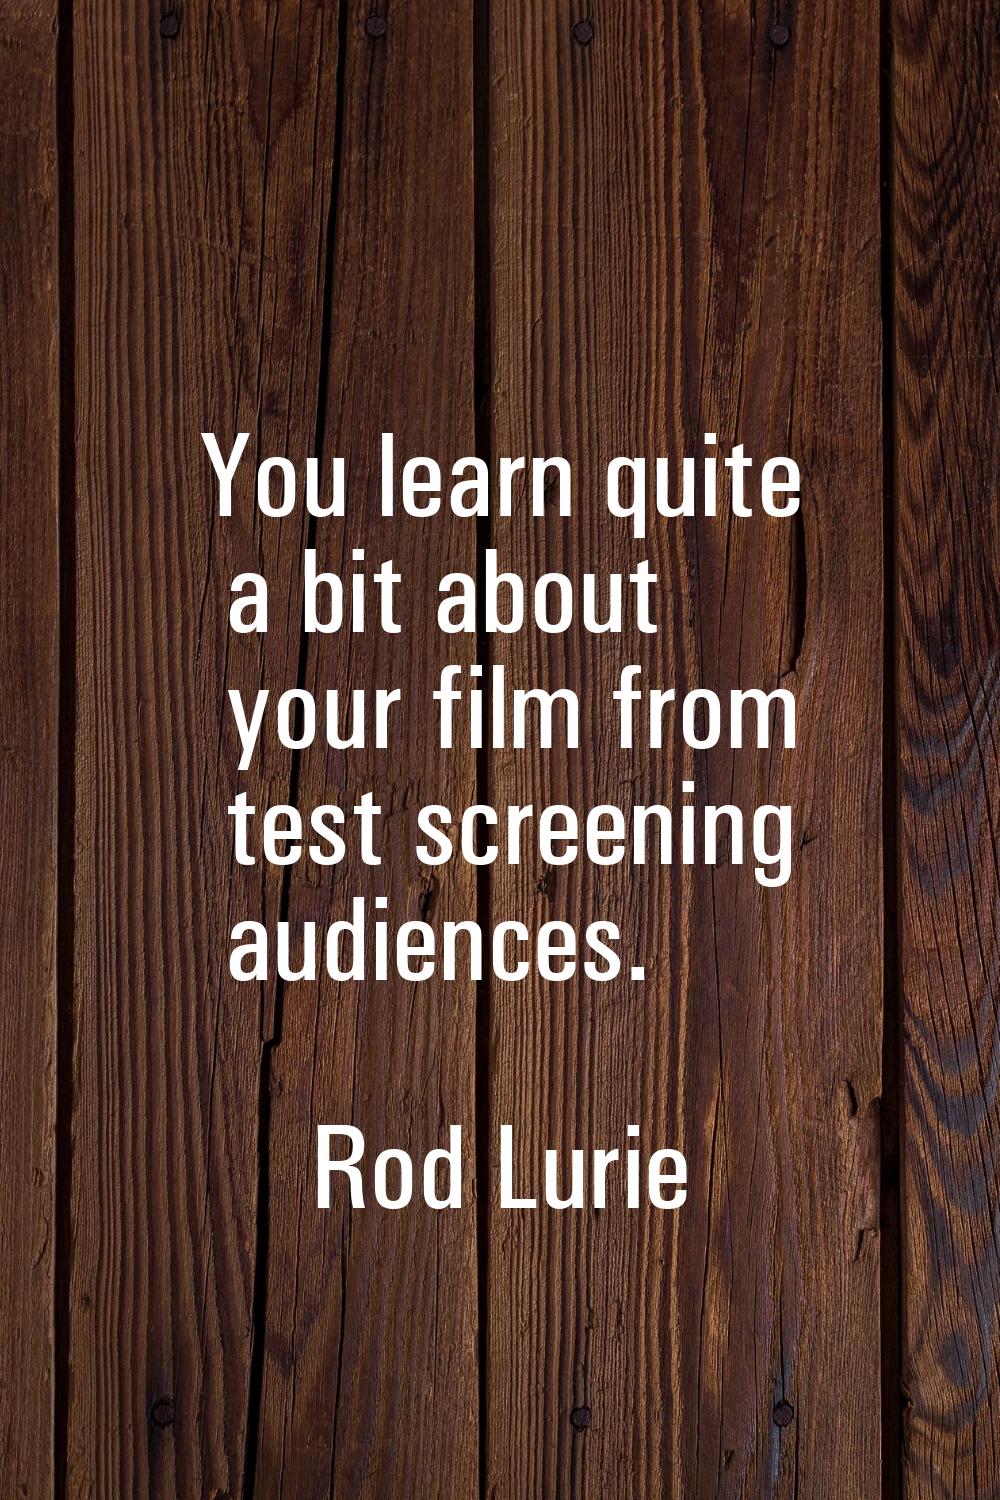 You learn quite a bit about your film from test screening audiences.